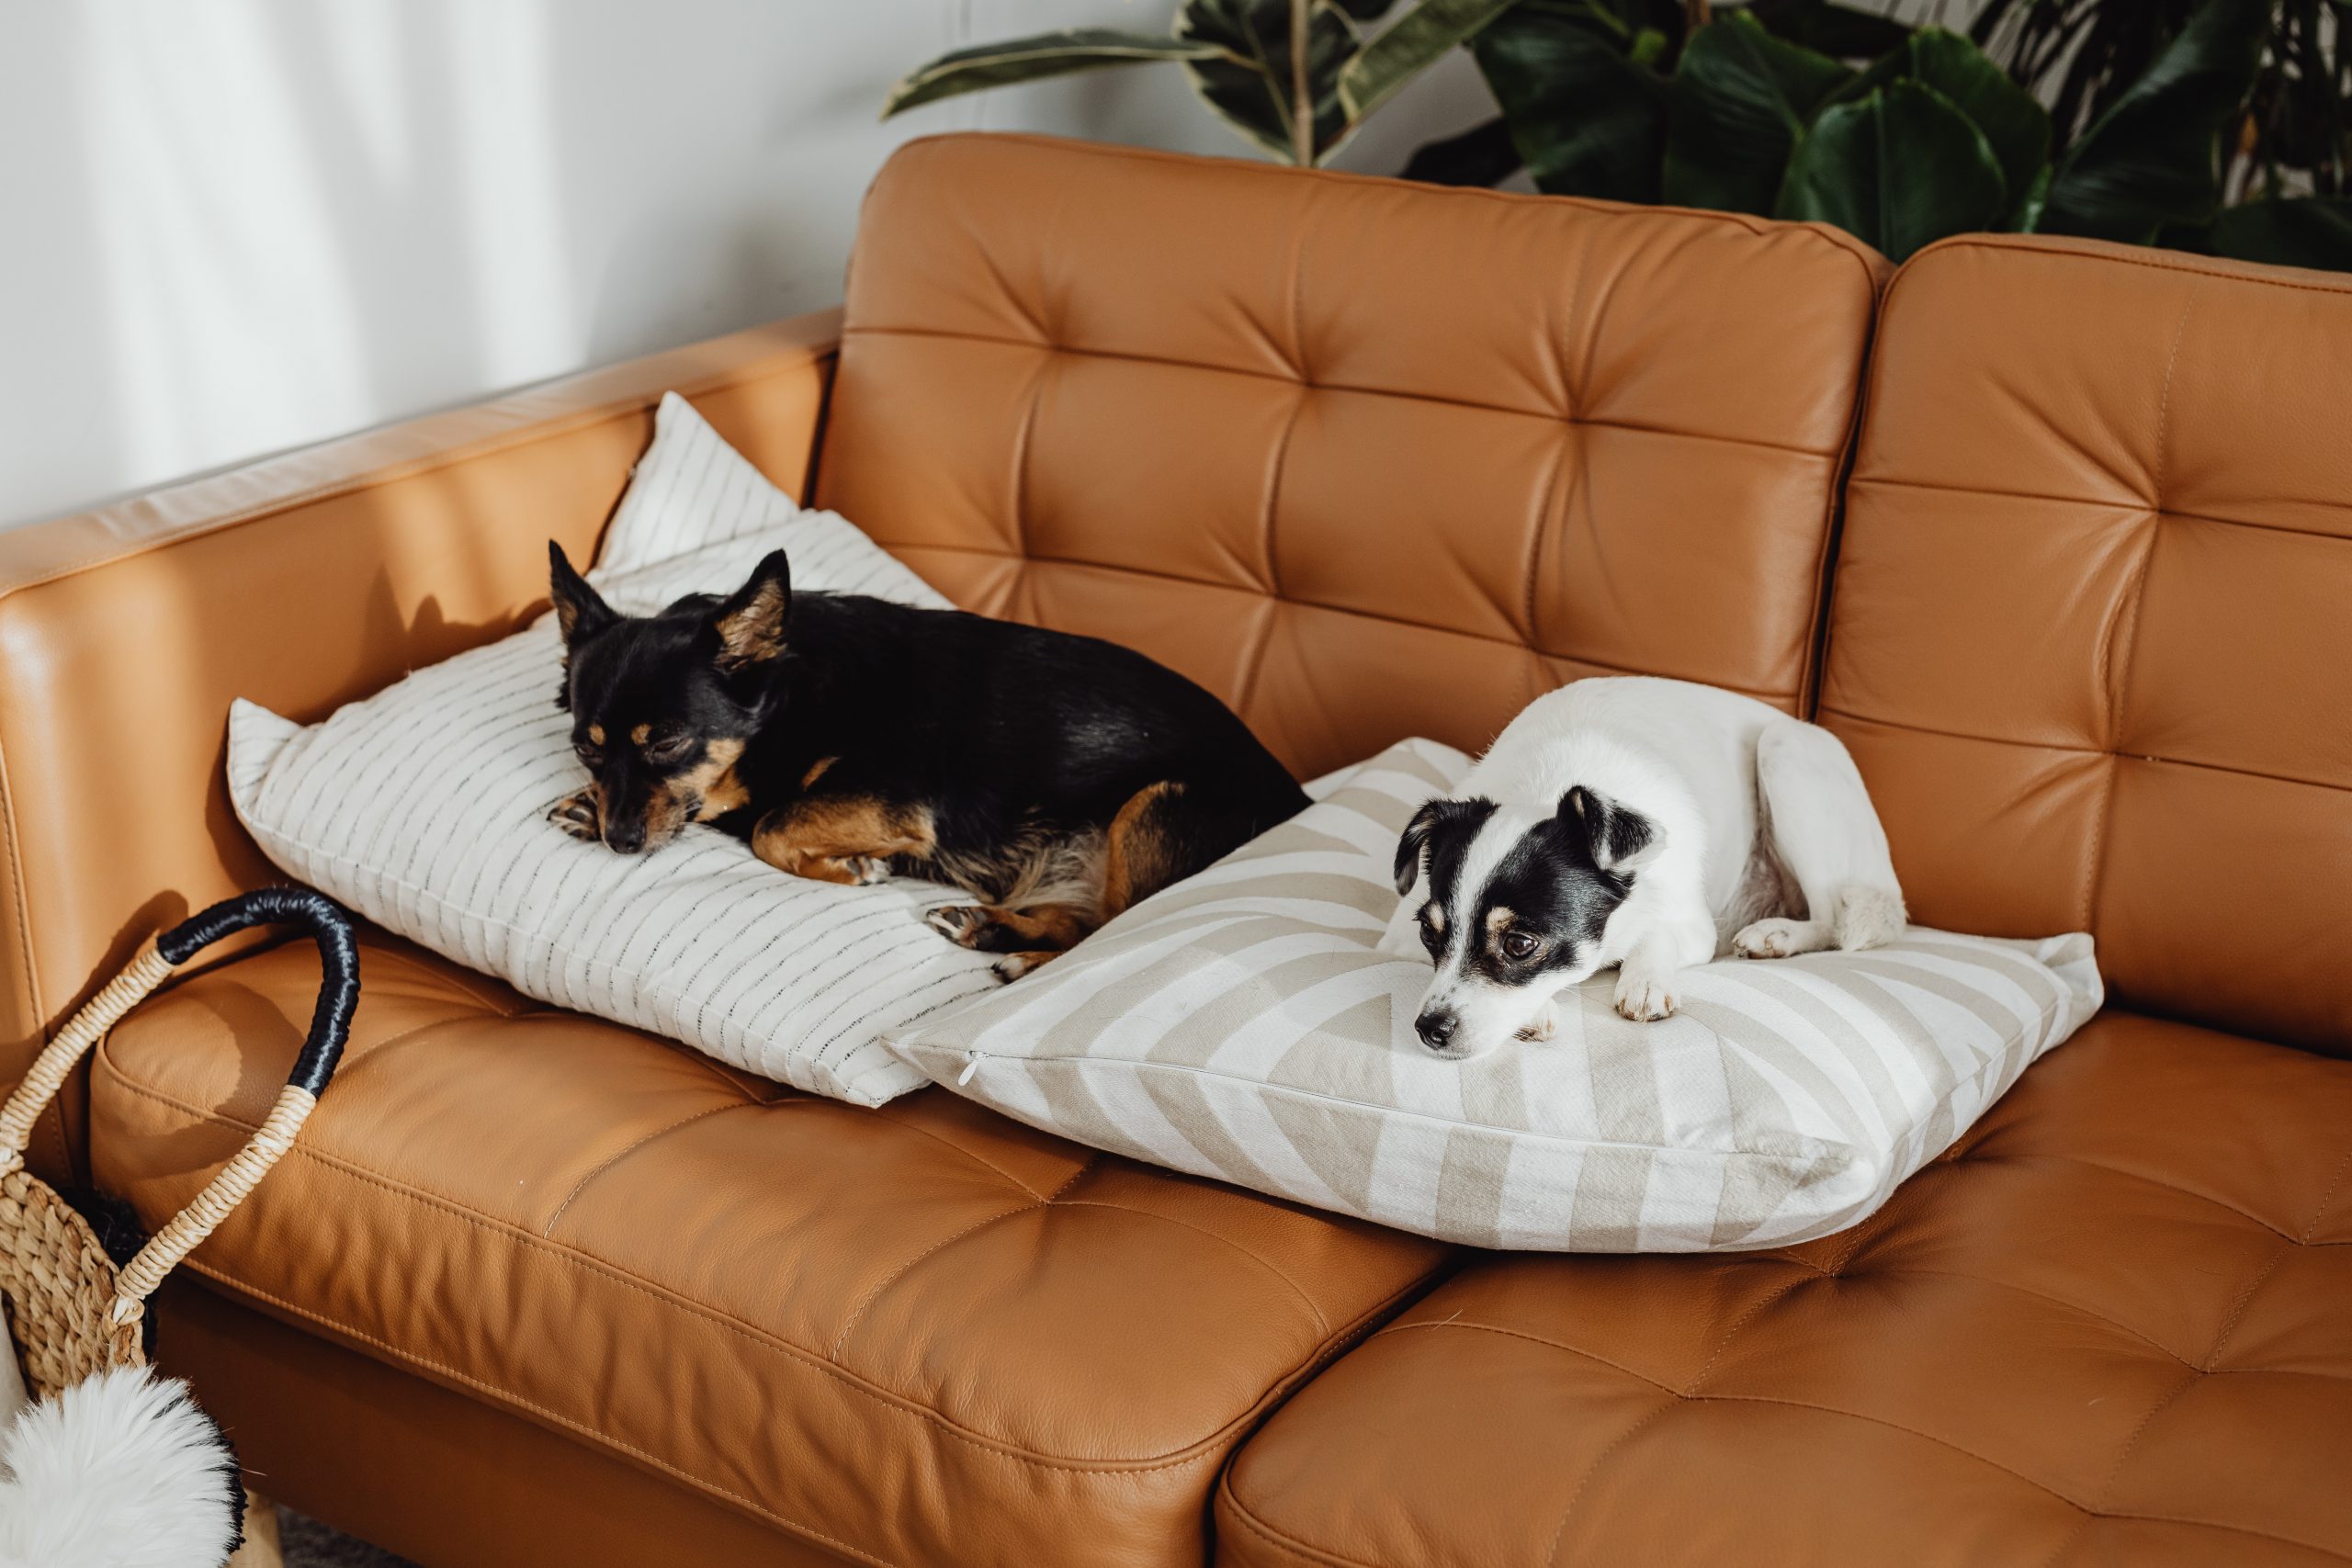 Pet-Friendly Living: How To Foster A Happy Rental For Your Furry Friends